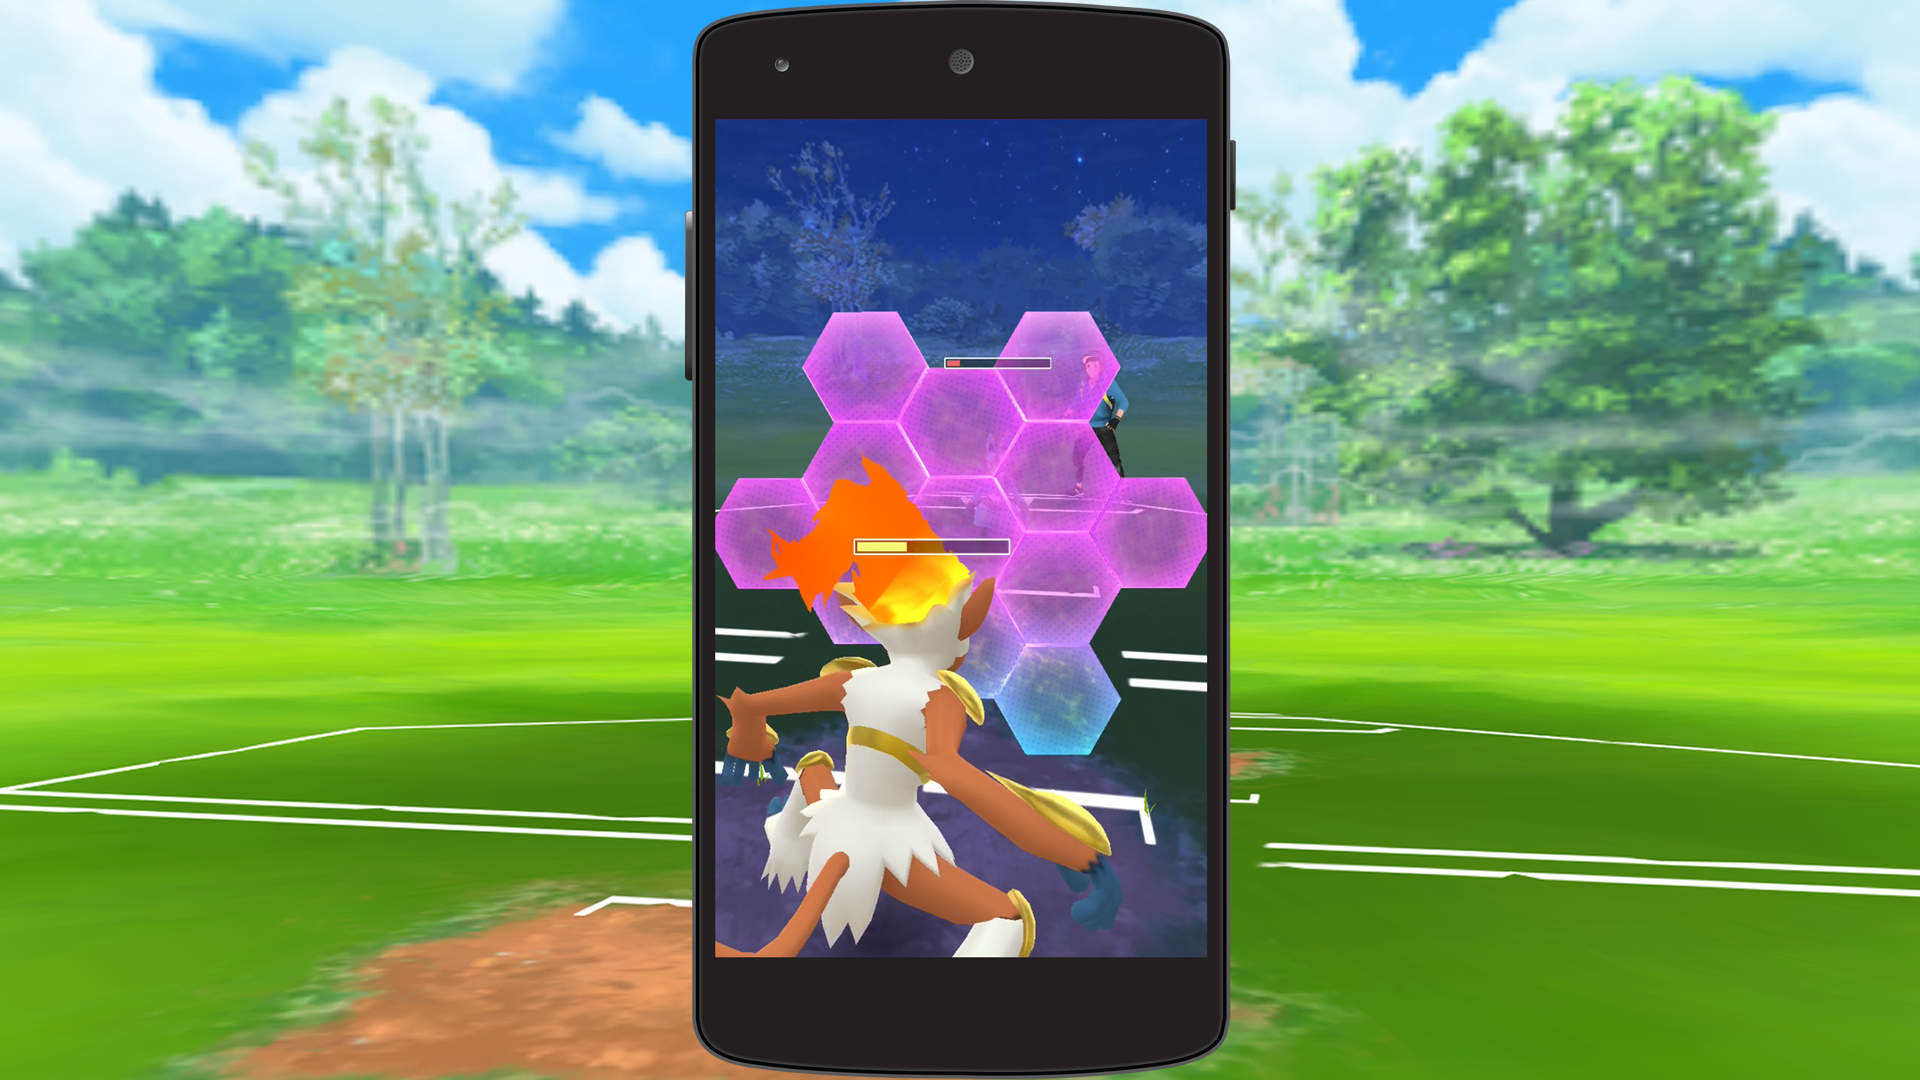 Pokémon Go' PvP Feature in the Works, Says Niantic